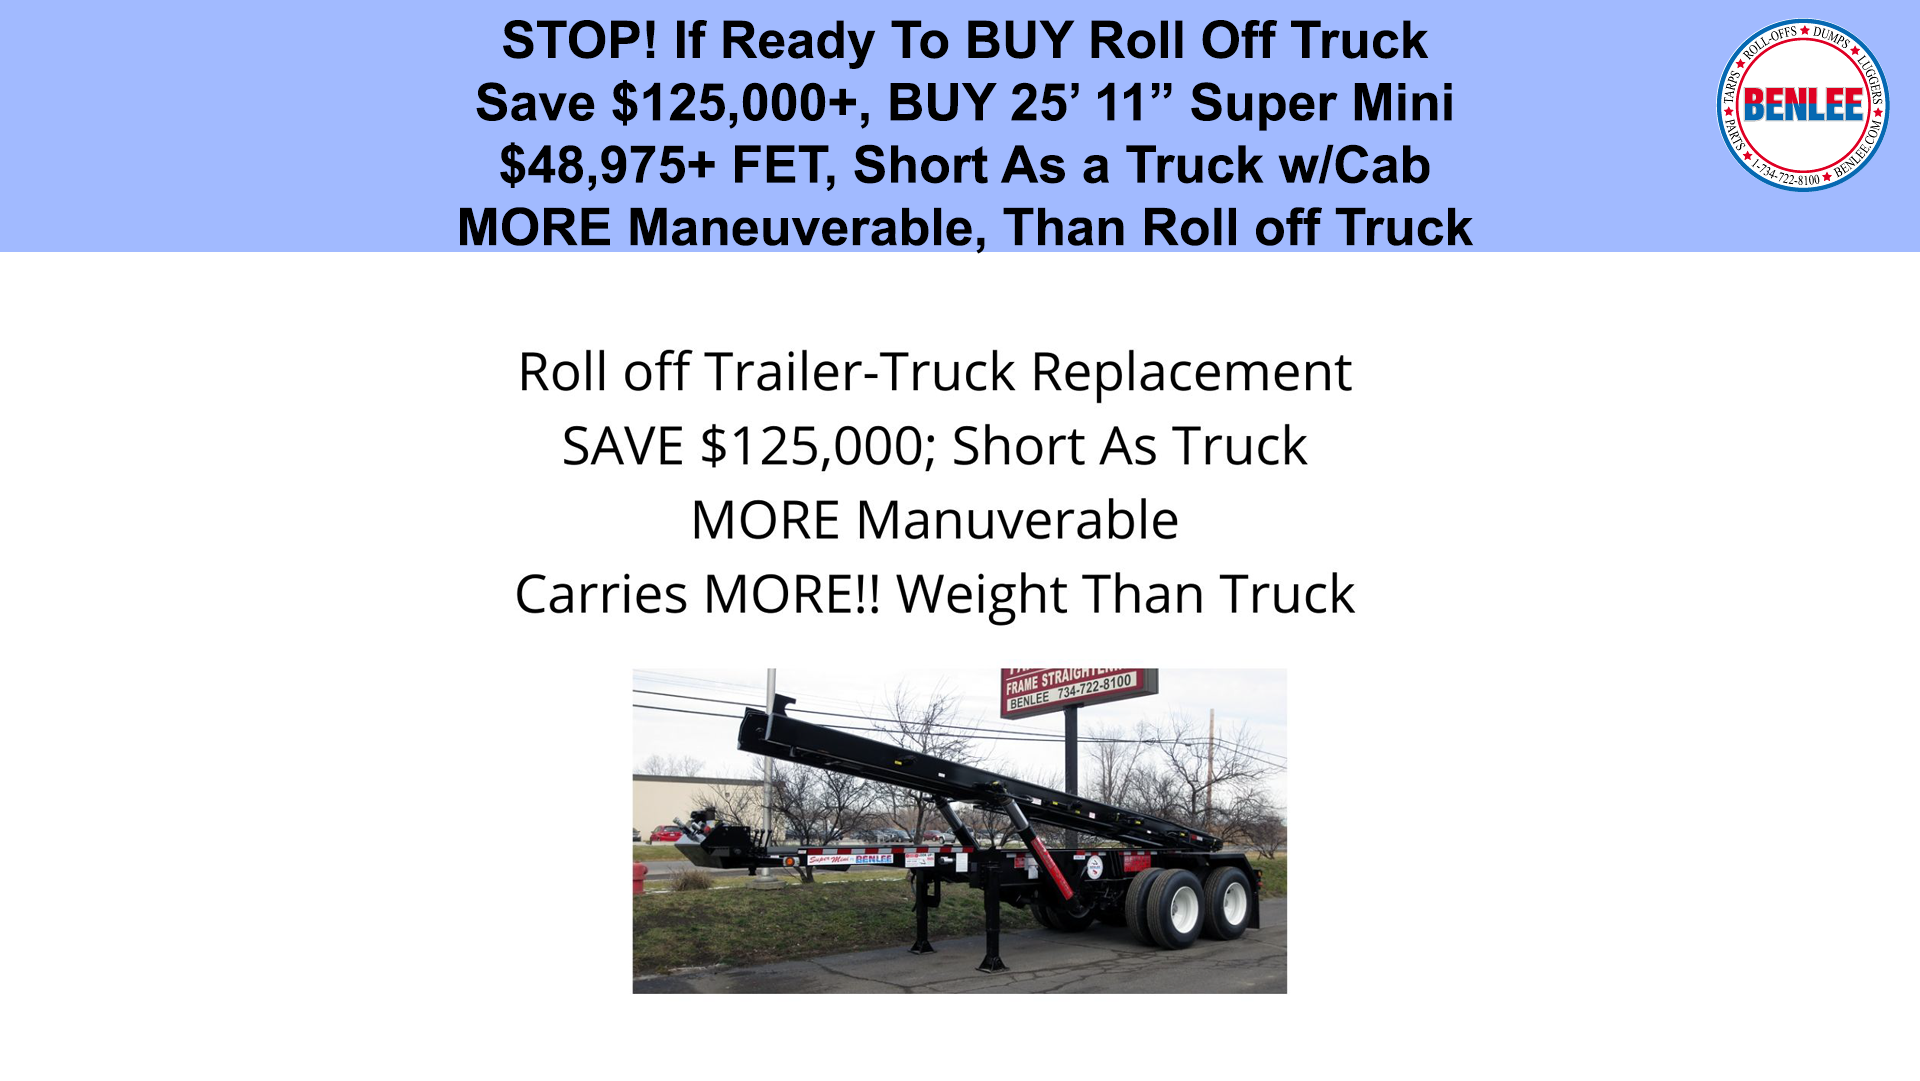 Roll off Trailer-Truck Replacement